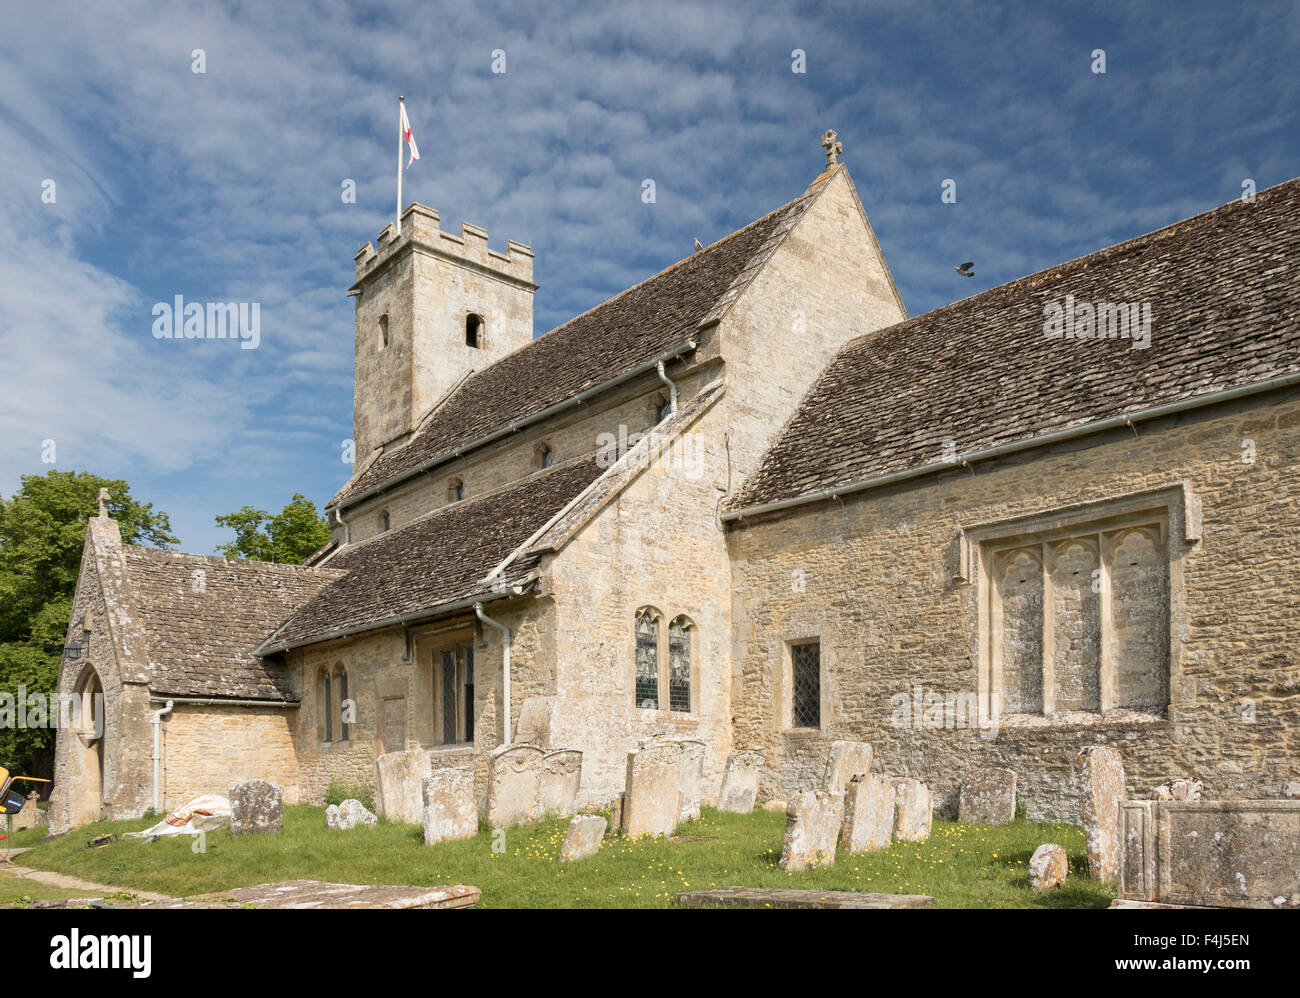 Eglise St Mary, Swinbrook, Oxfordshire, Cotswolds, en Angleterre, Royaume-Uni, Europe Banque D'Images